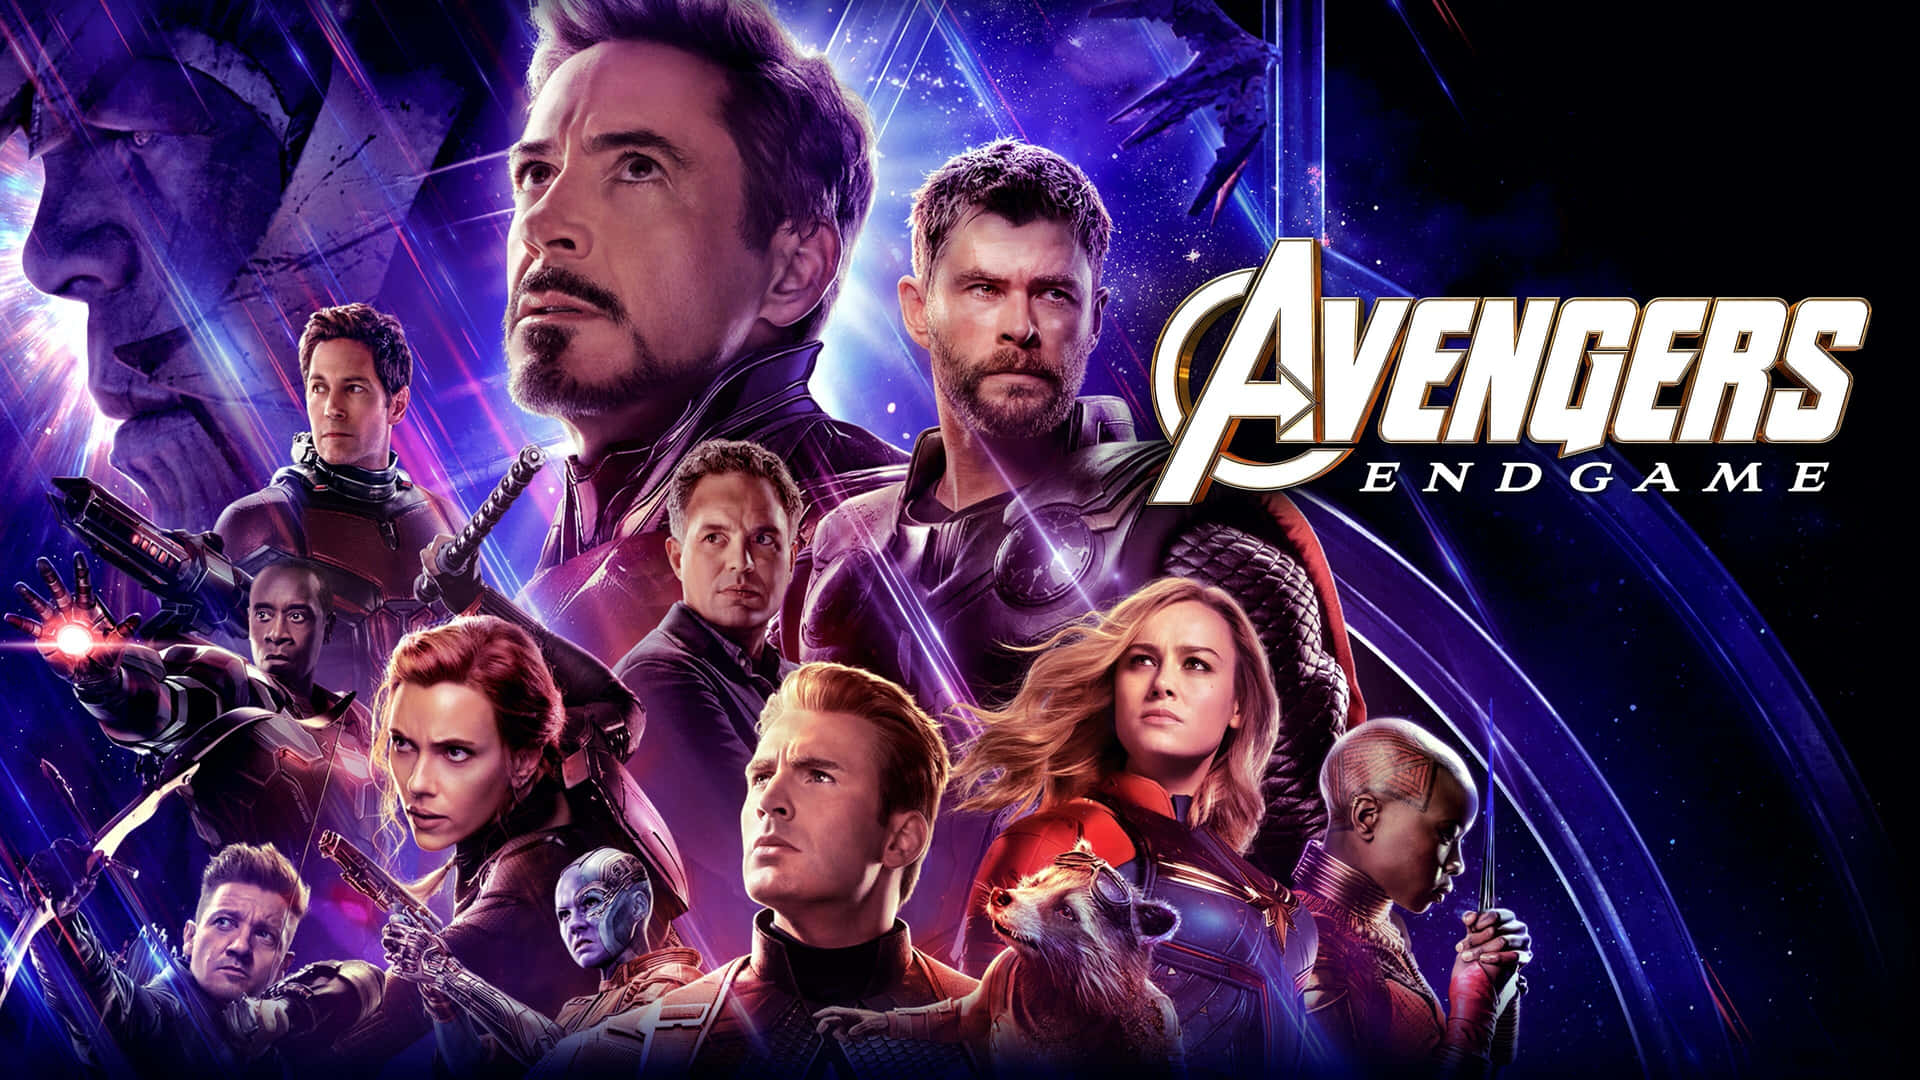 The triumphant Avengers stand shoulder to shoulder with the Soul Stones